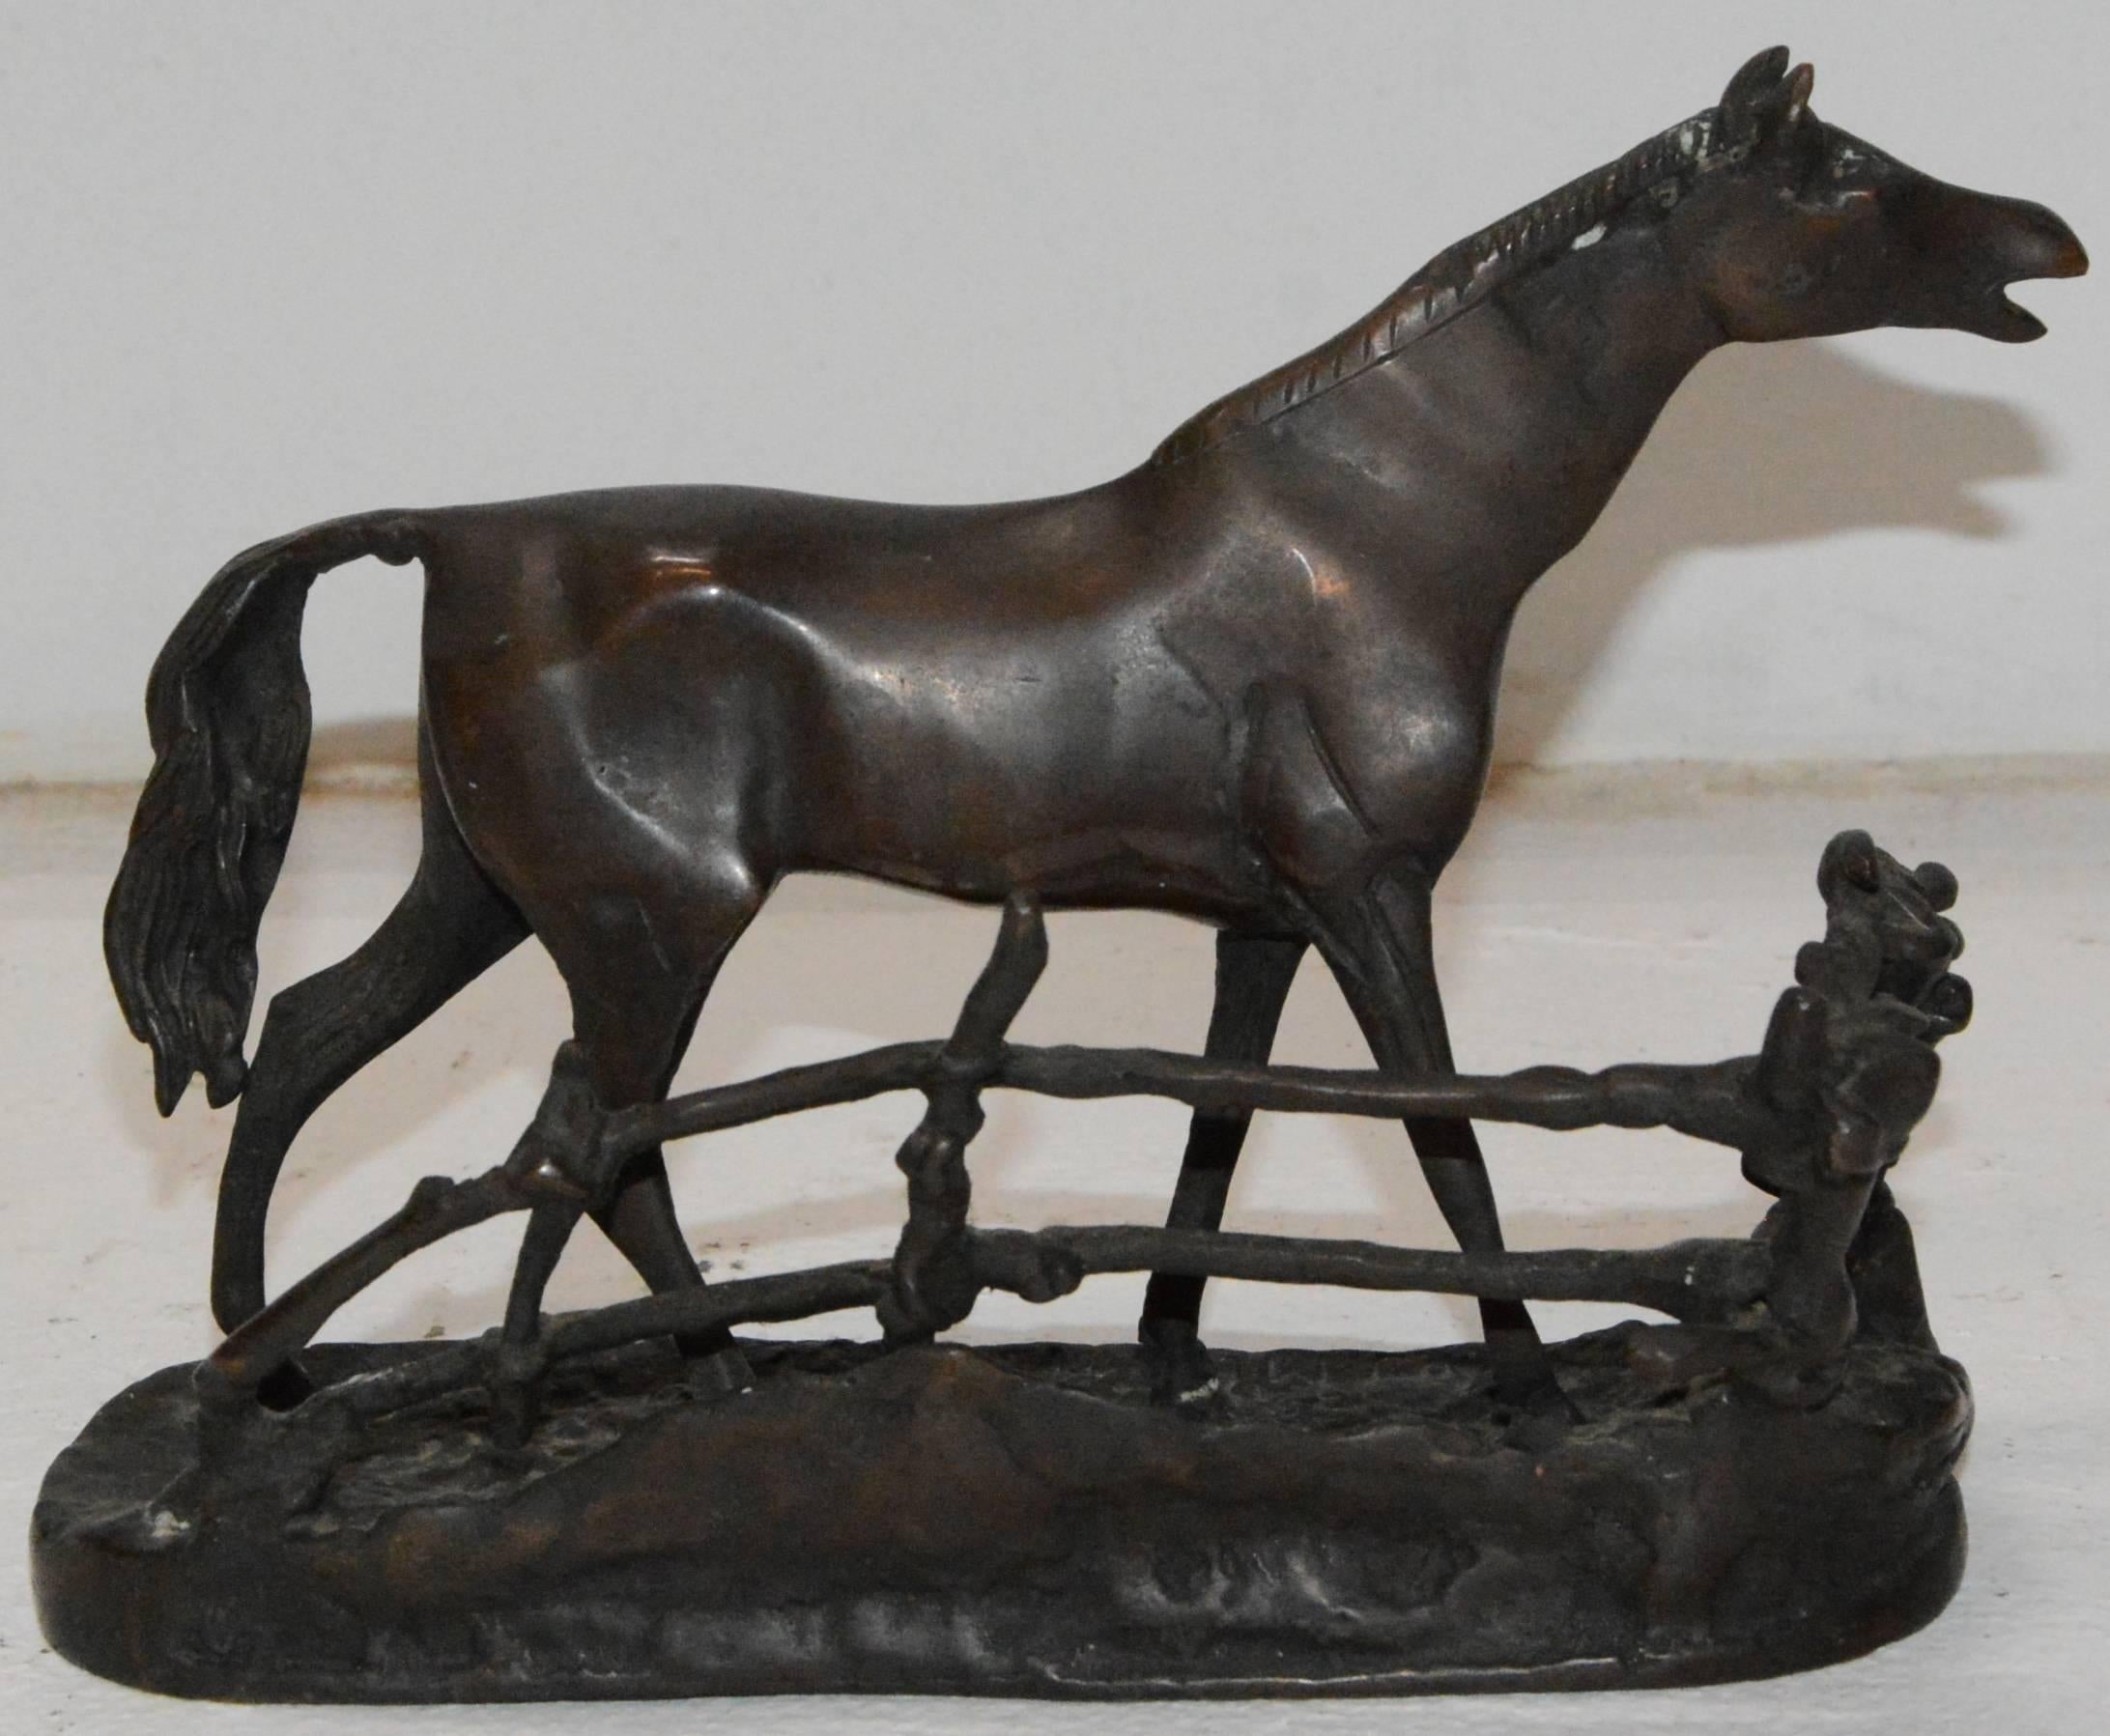 This cast bronze horse stands in a elongated stretched out pose. The details make this cast metal horse a piece you need for your collection. The horse is backed by a rustic, rambling fence.